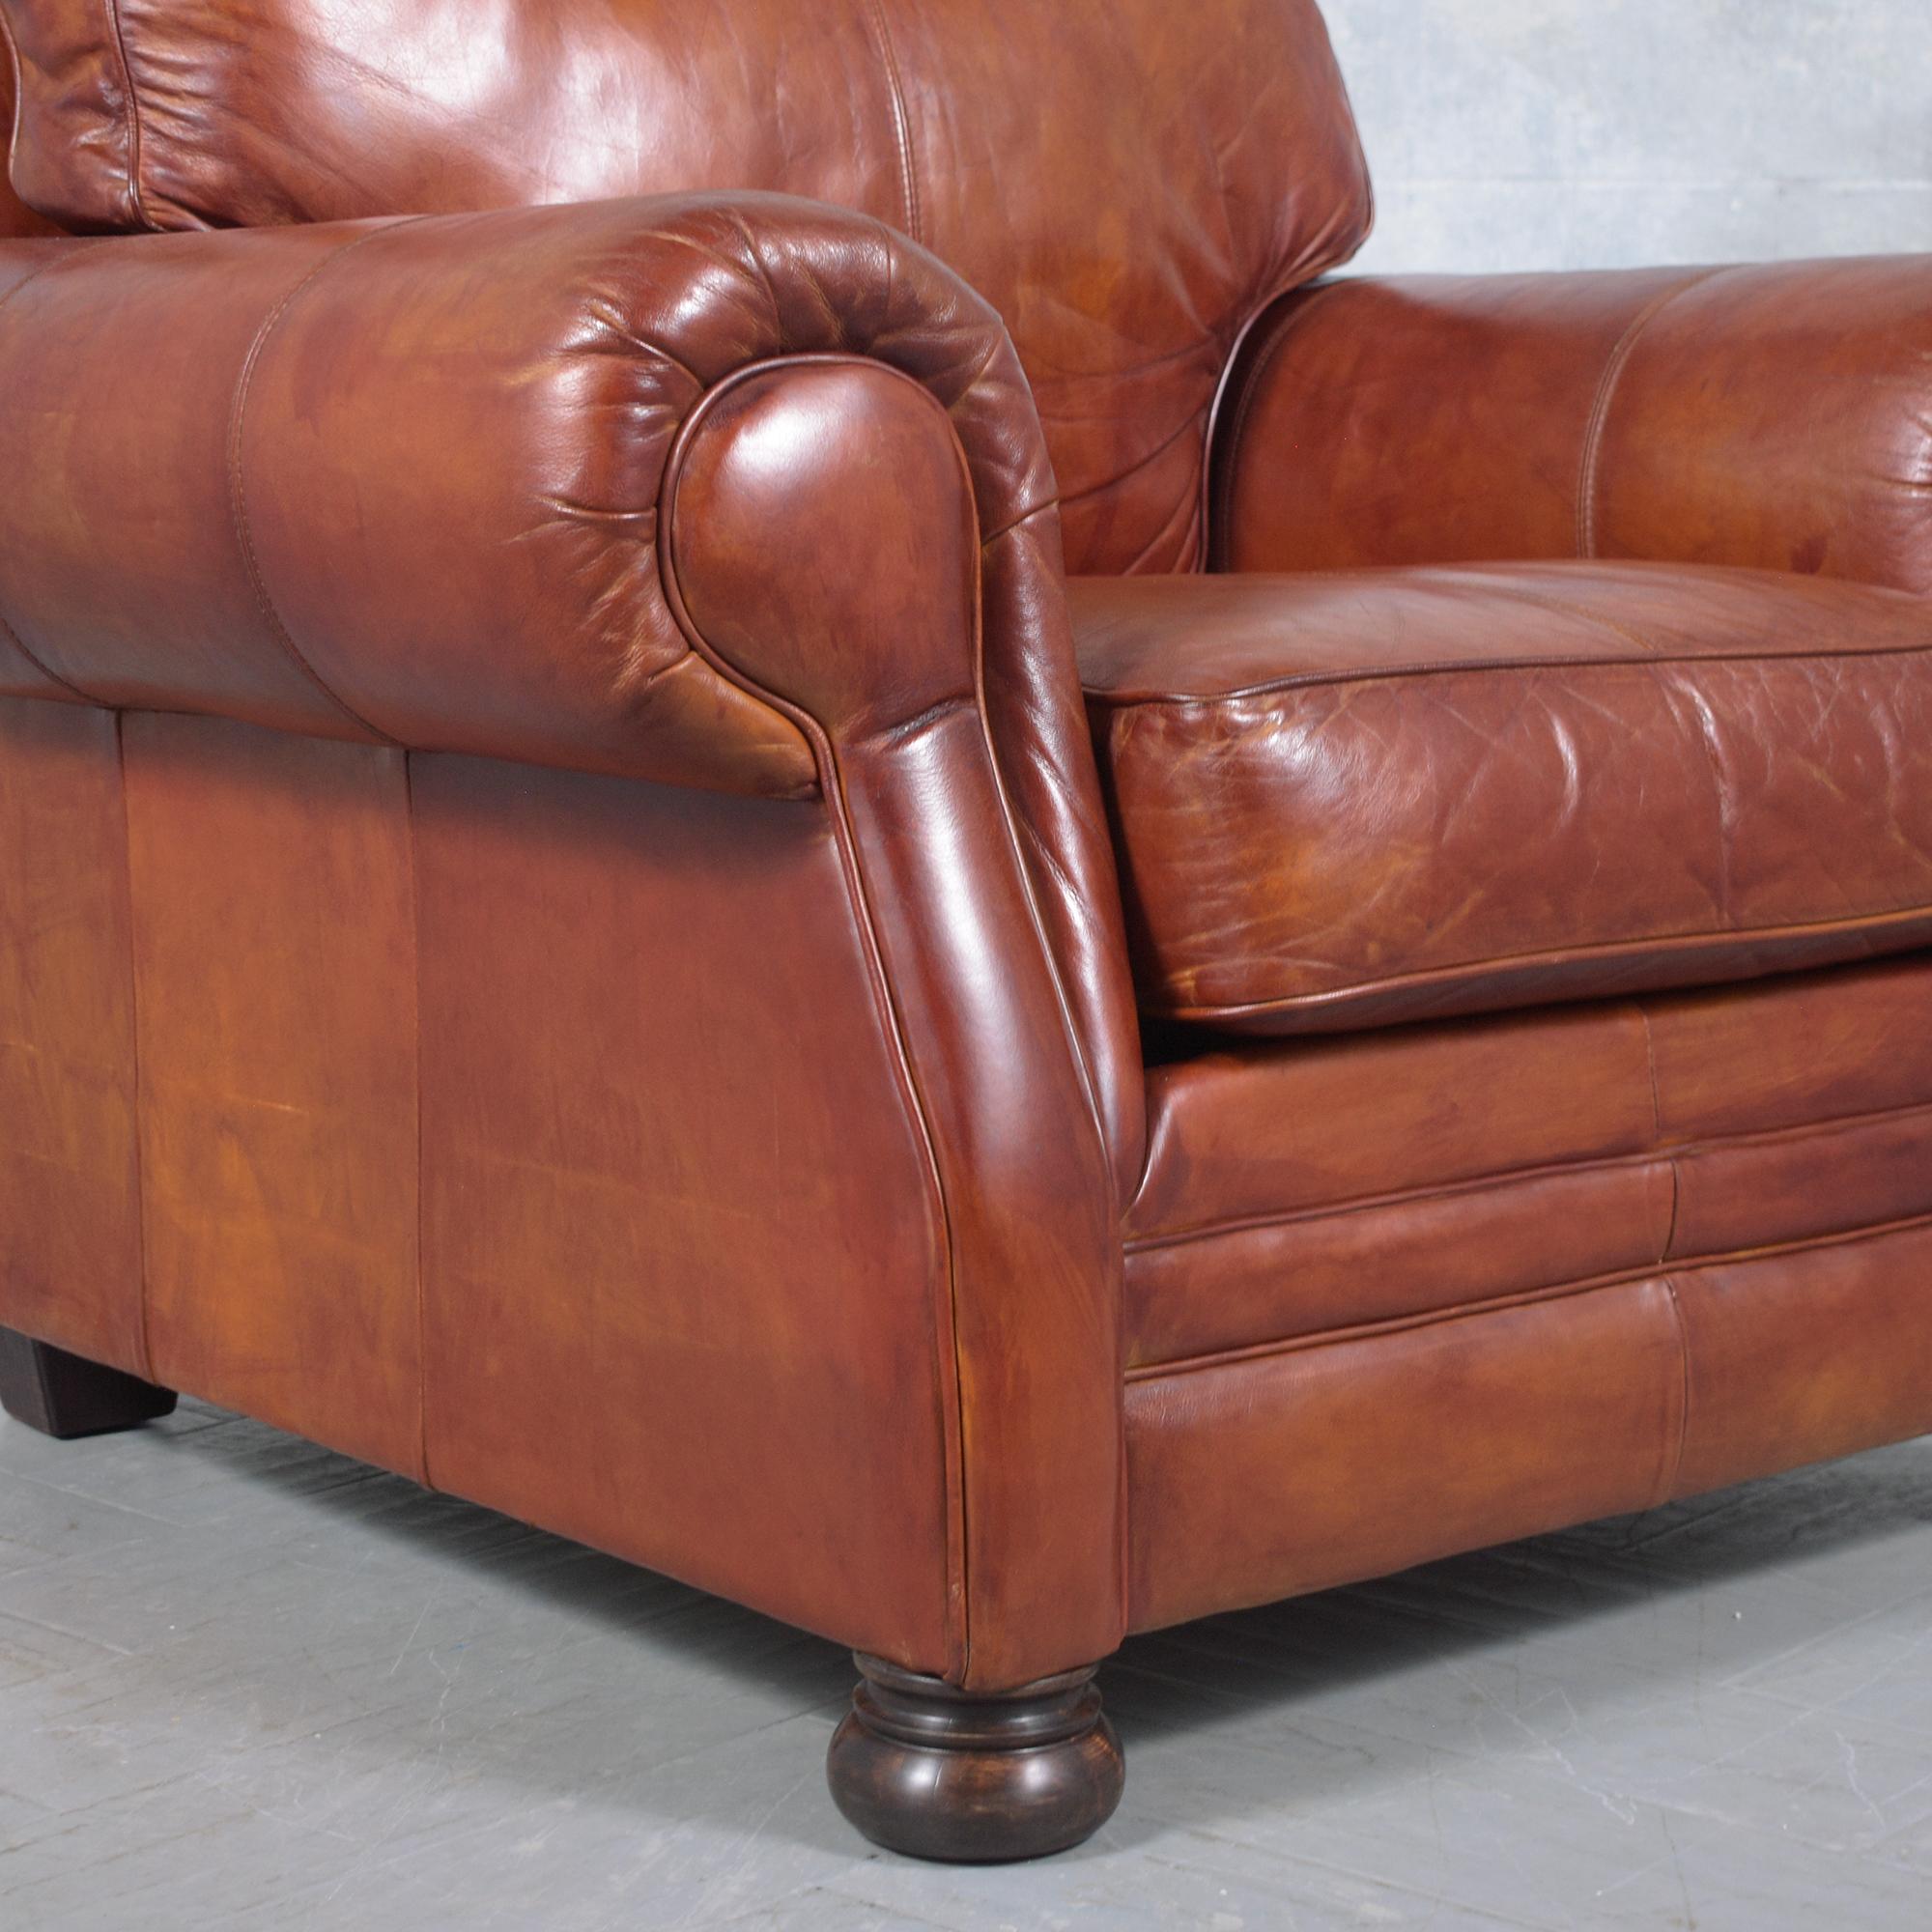 Restored Vintage Leather Armchairs in Cognac Brown with Carved Bun Legs For Sale 7